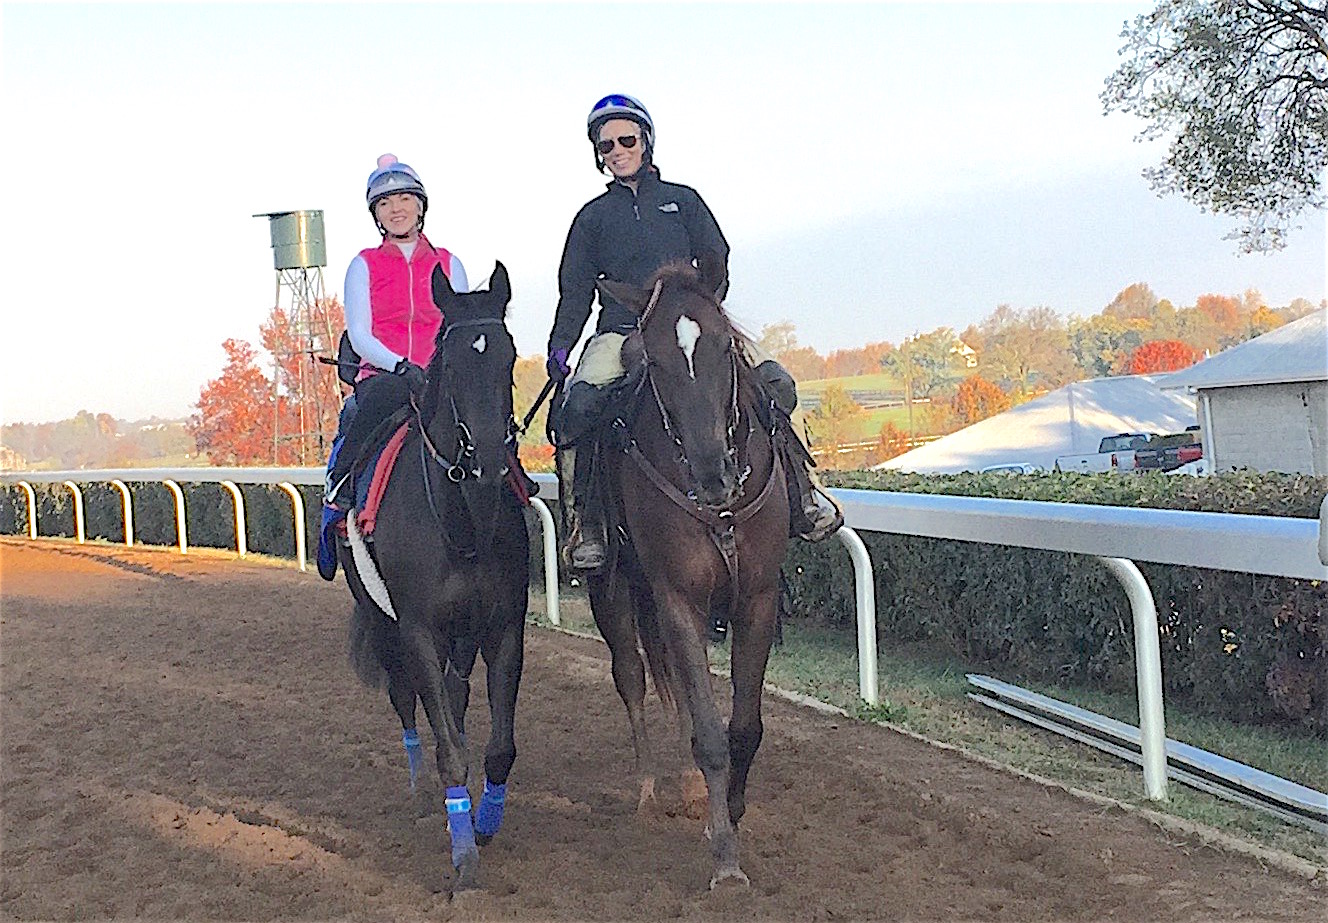 ‘My baby’: Kerri Radcliffe aboard Nemoralia ahead of the Breeders’ Cup Juvenile Fillies Turf in 2015 at Keeneland, where she finished third. The now 7-year-old More Than Ready mare, bought by Radcliffe at two, is now at Claiborne Farm in Kentucky